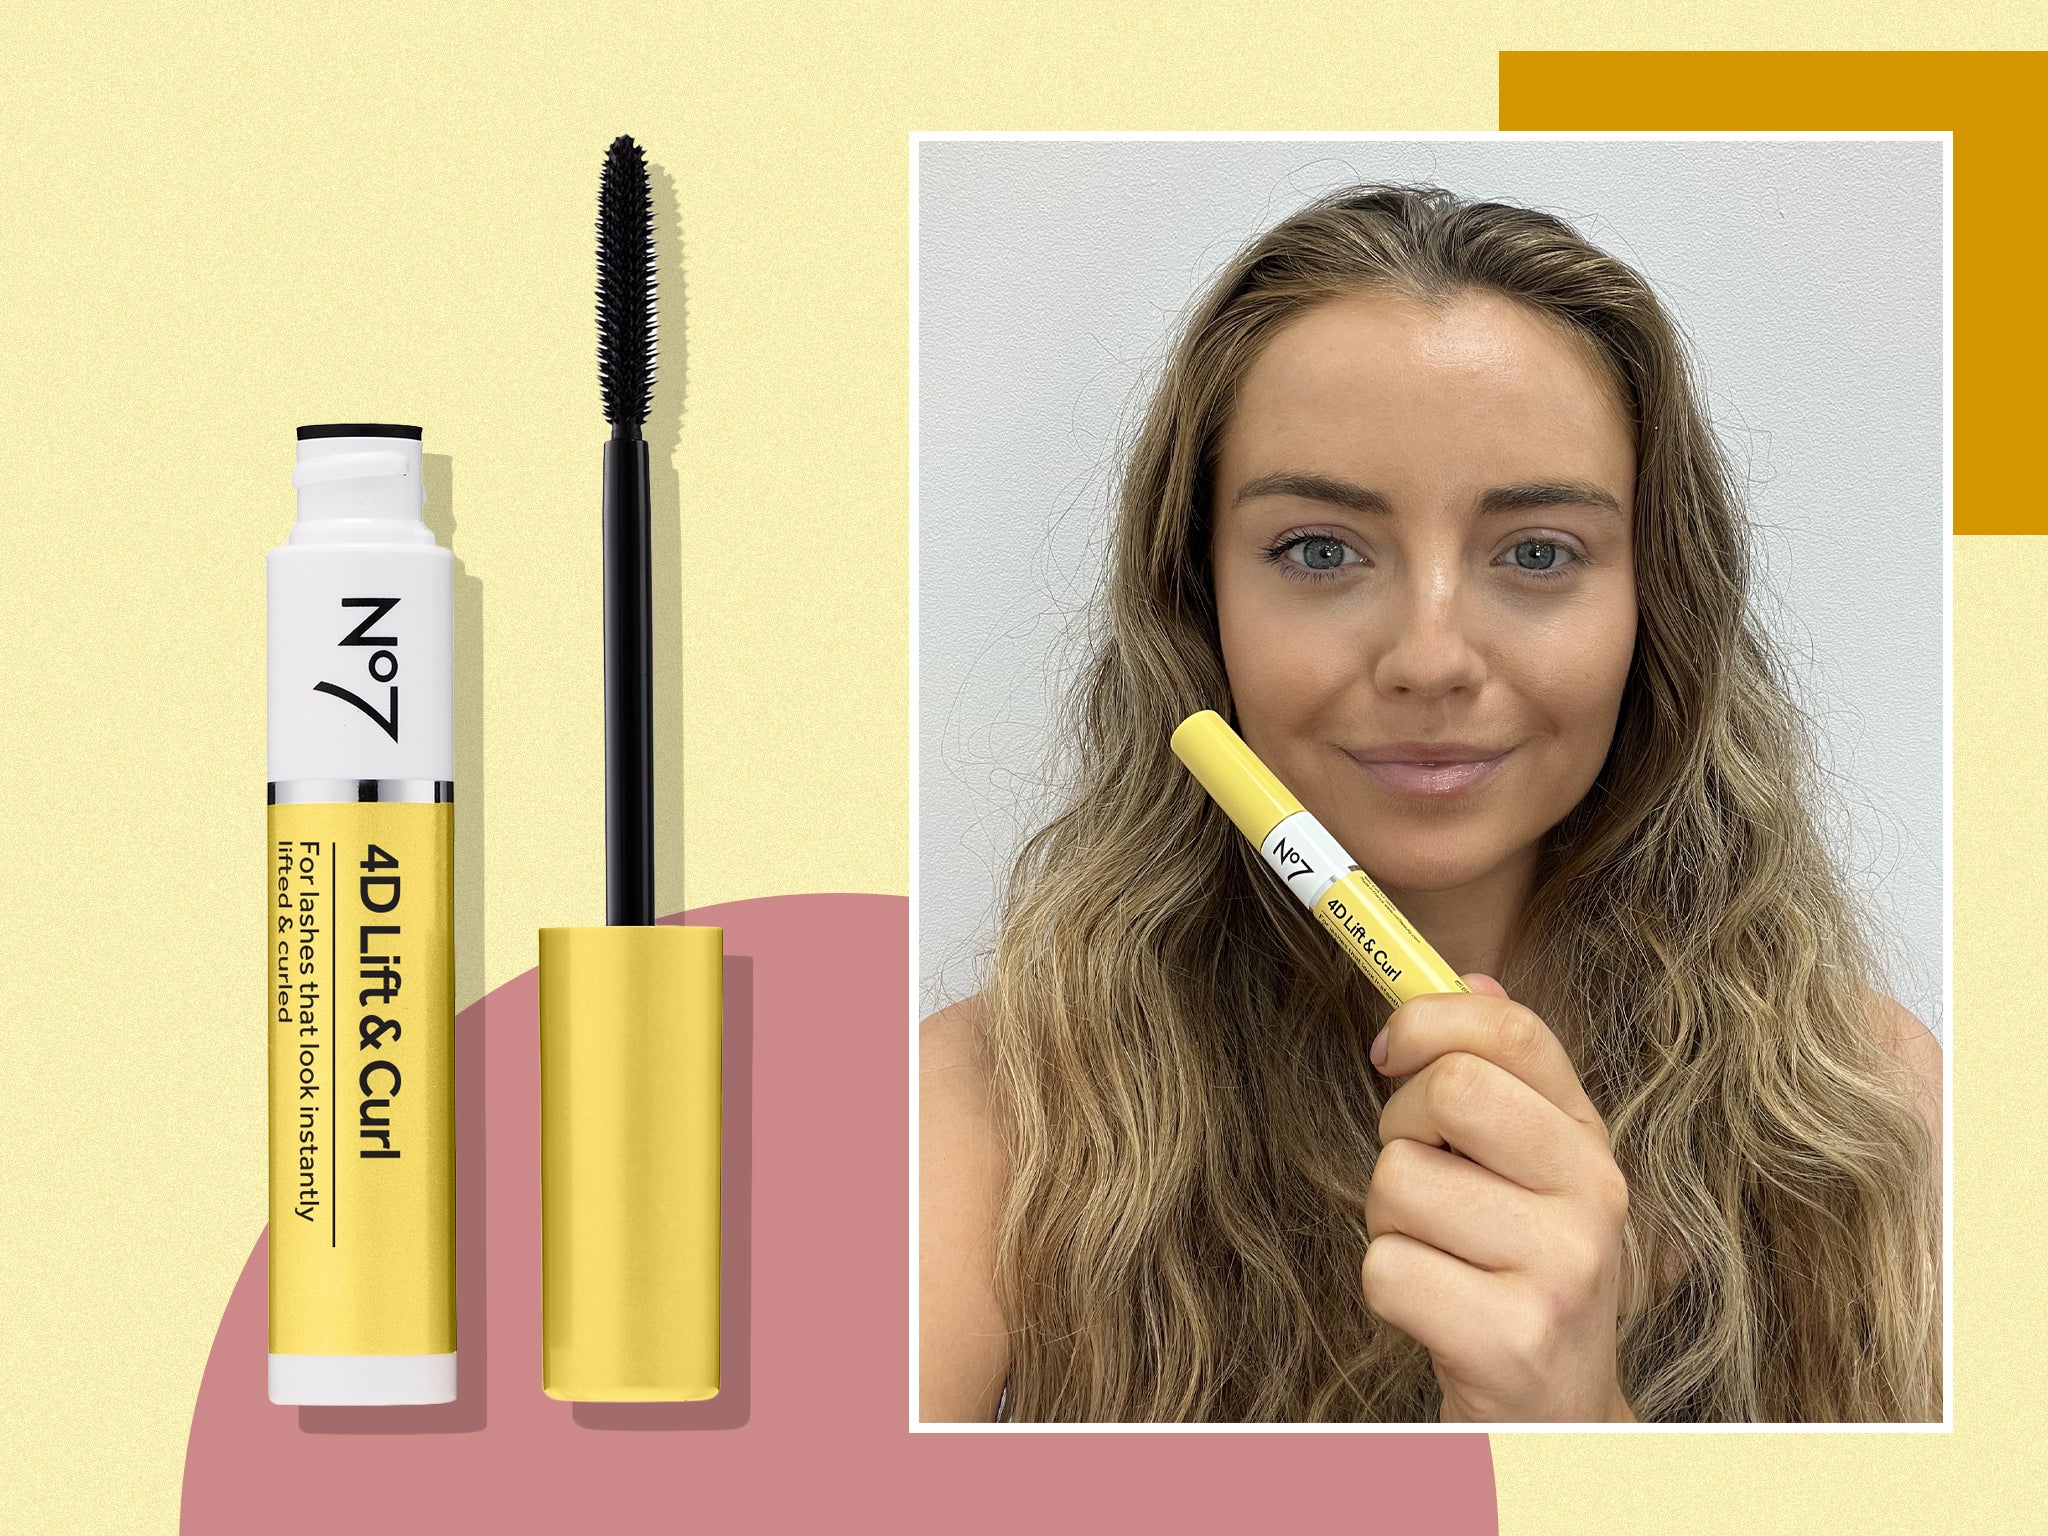 The 4D mascara lengthens, lifts, curls and coats lashes